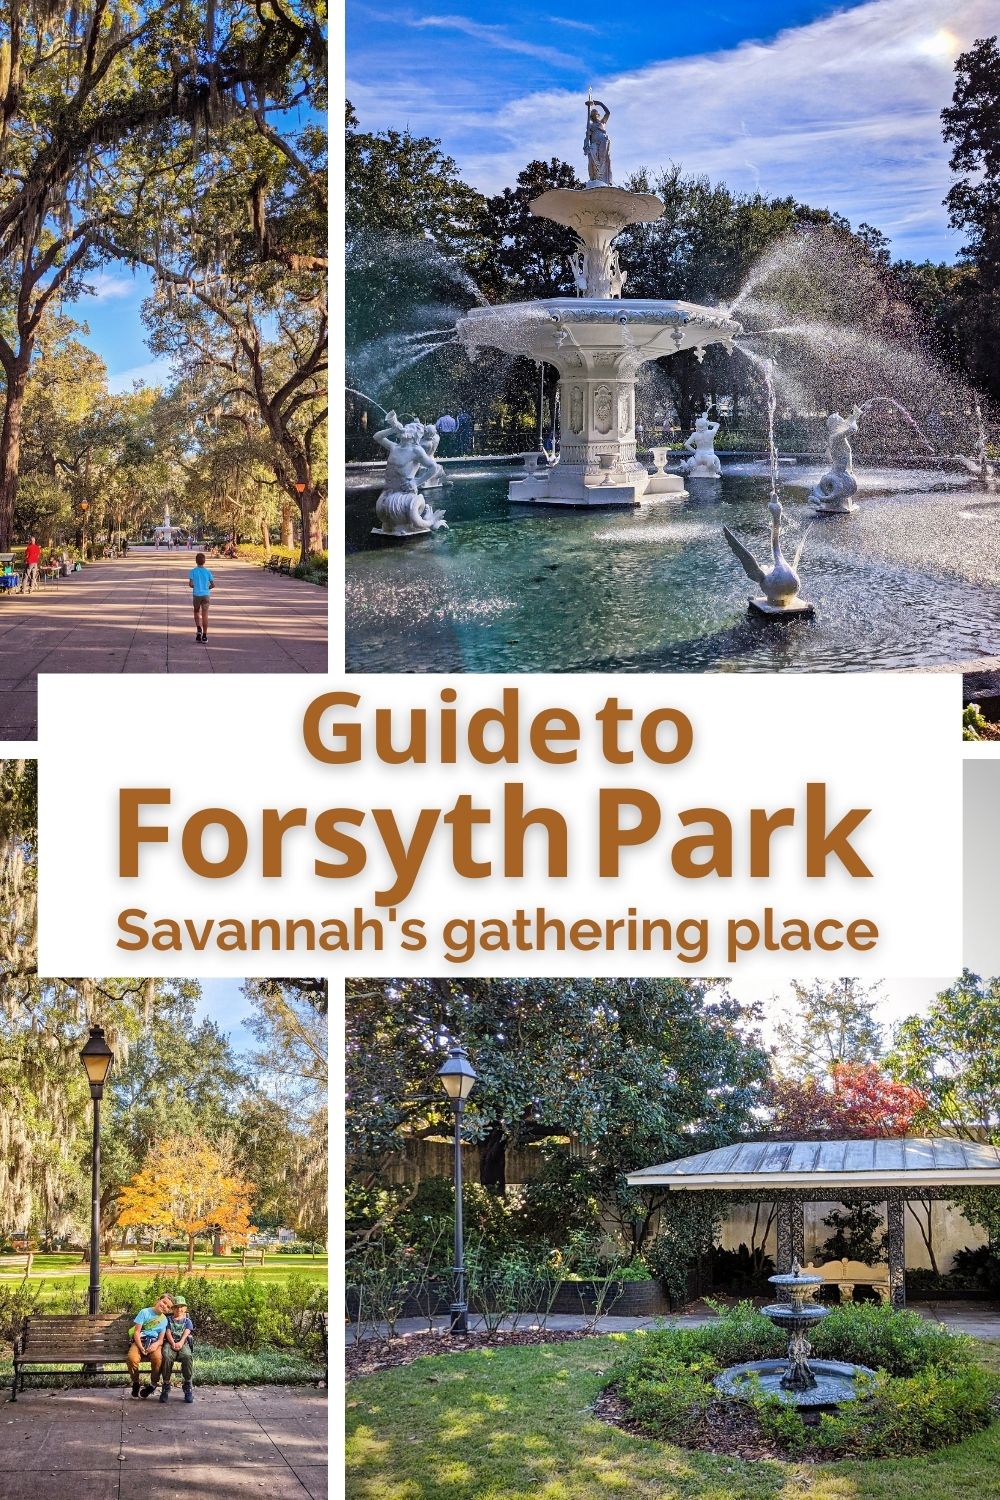 There are lots of things to do at Forsyth Park in Savannah, Georgia. From history in the park to brunch and LGBTQ events, this guide to Forsyth Park and the Victorian District of Savannah is all you need for a great visit.